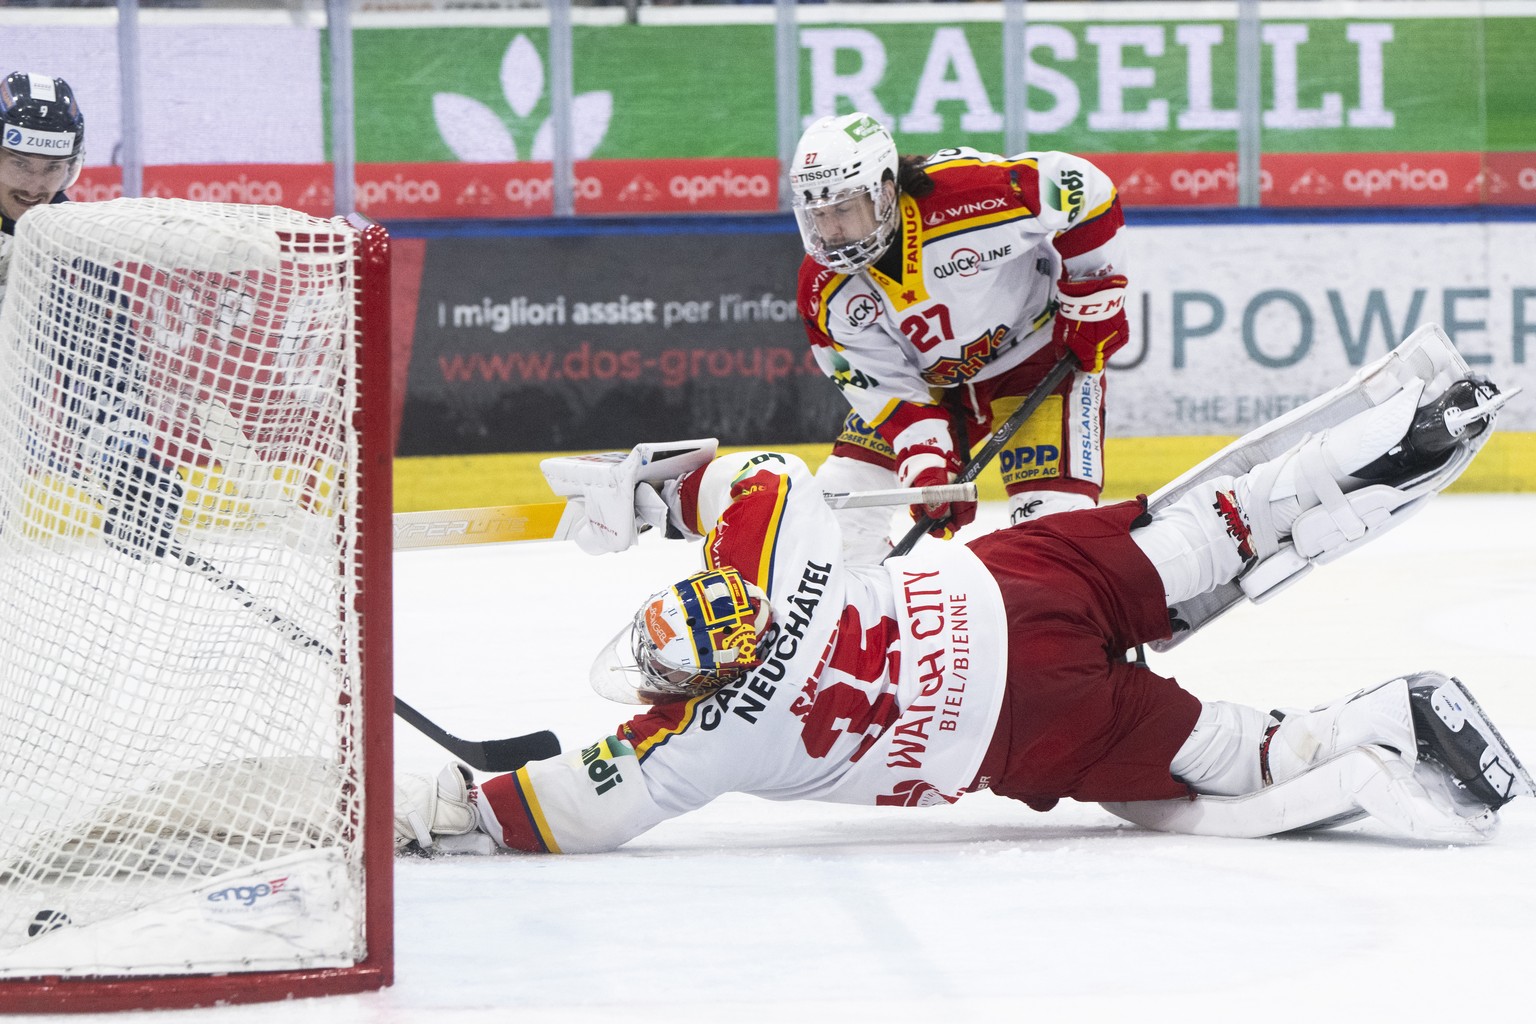 Ambri player Laurent Dauphin scored a 2-3 goal past Bale goalkeeper Harry Saitiri, during the play-in match of the 2023/24 Swiss League A (NLA) championship between HC Ambri Piot...